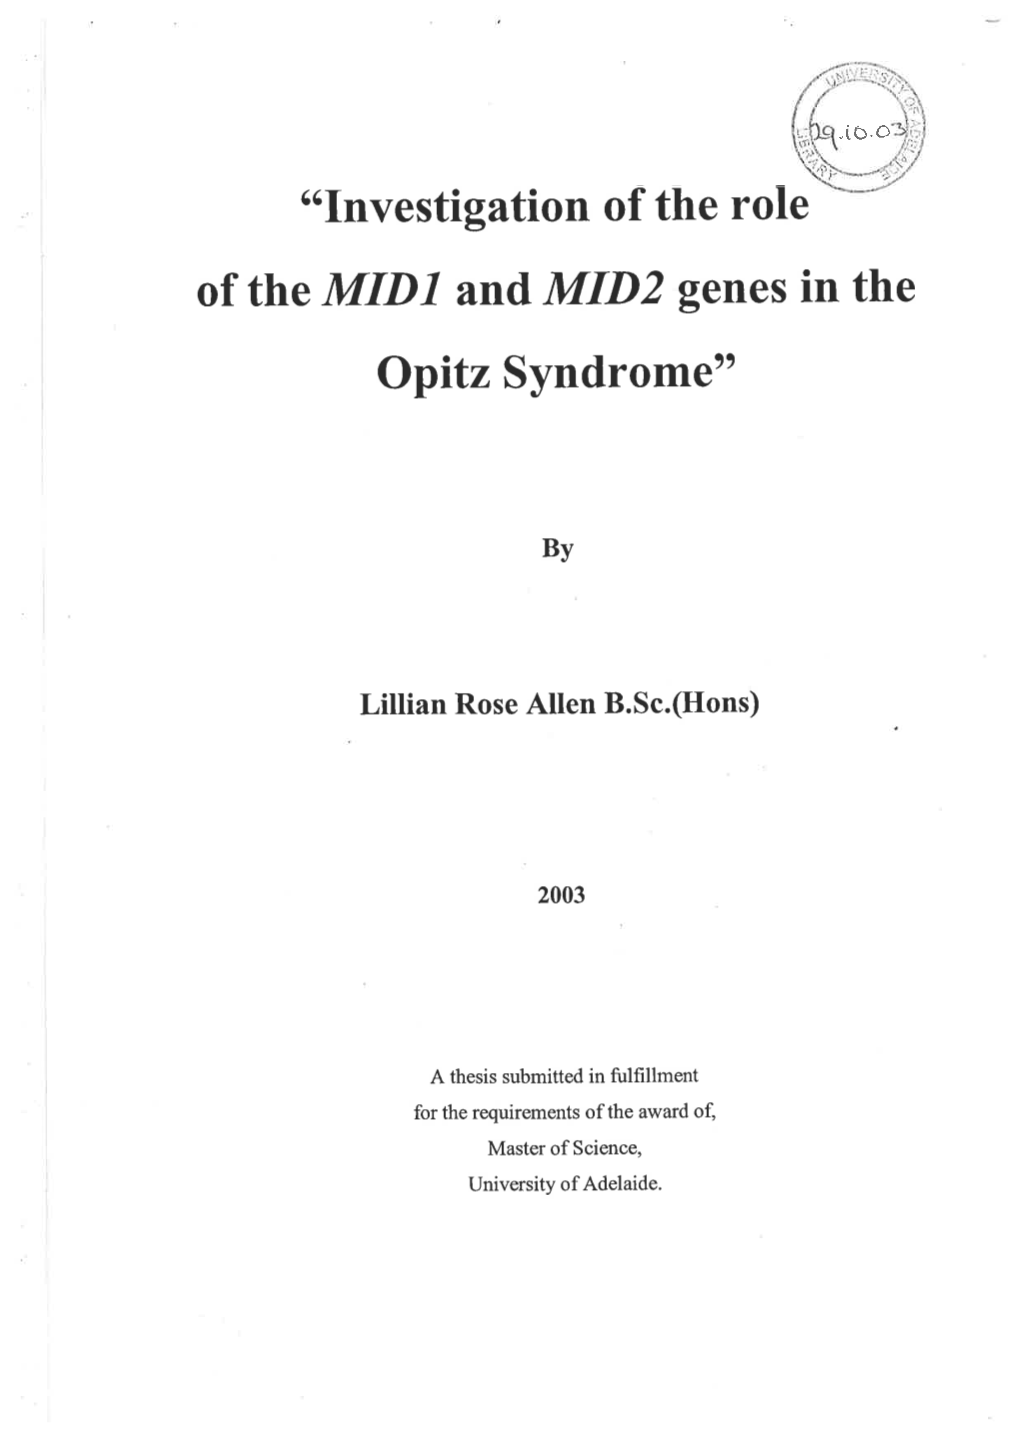 Of the MIDI and MID2 Genes in the Opitz Syndrome"